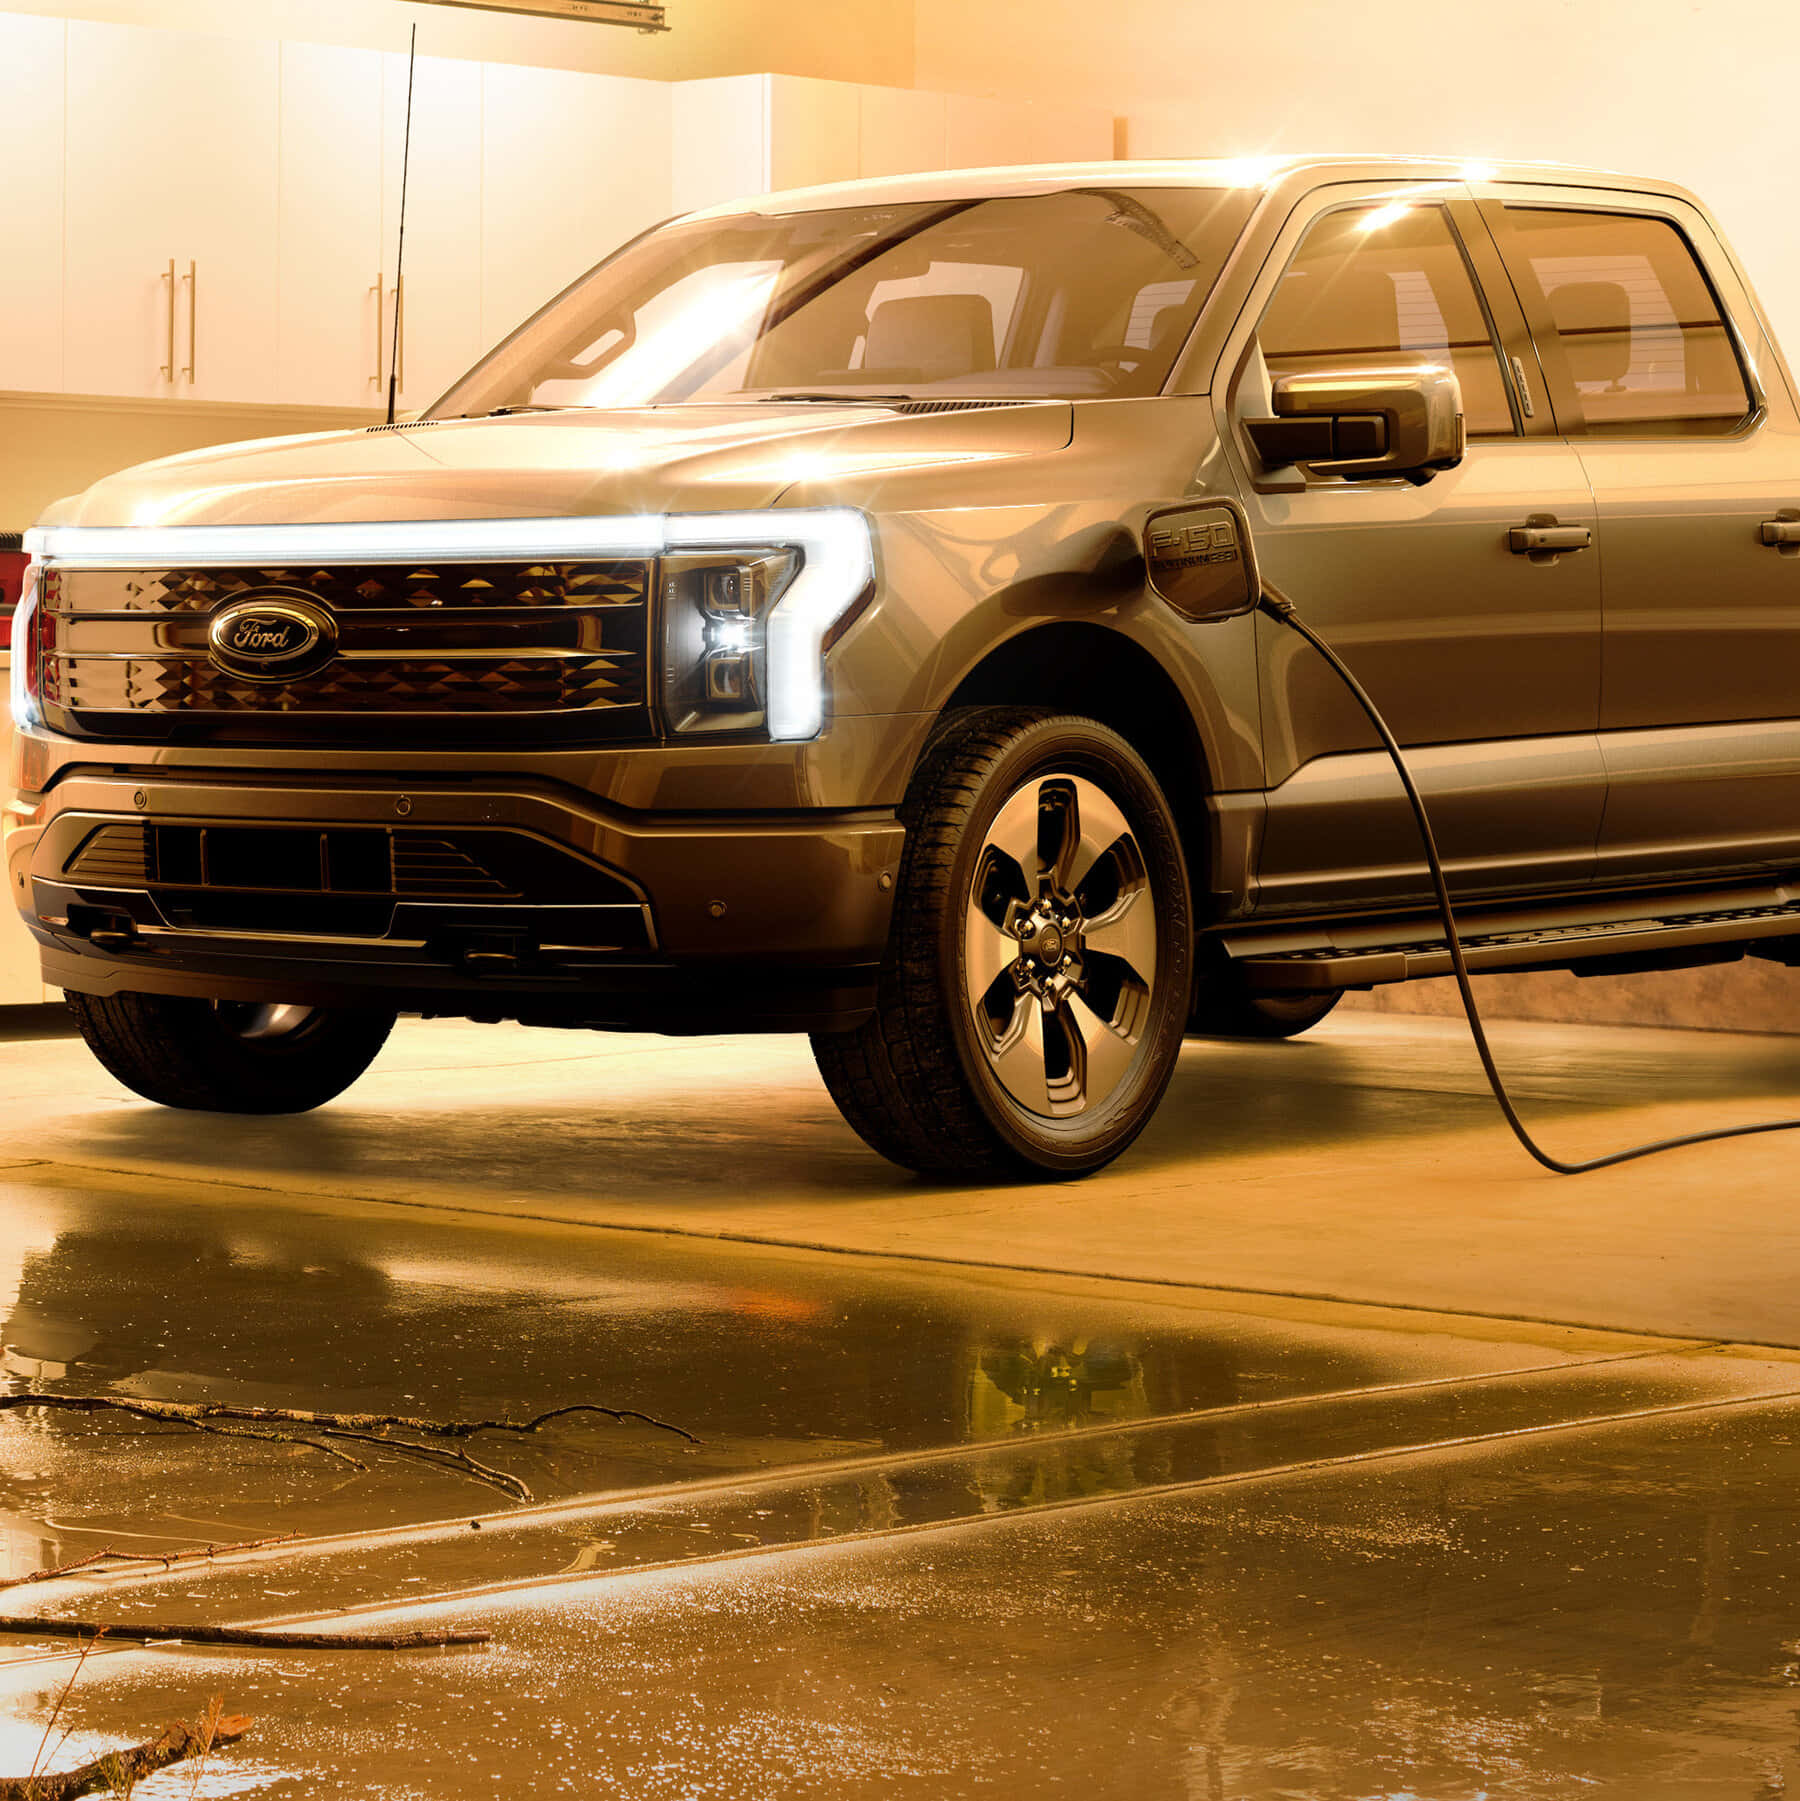 A Ford F-150 Pickup Truck Is Parked In A Garage